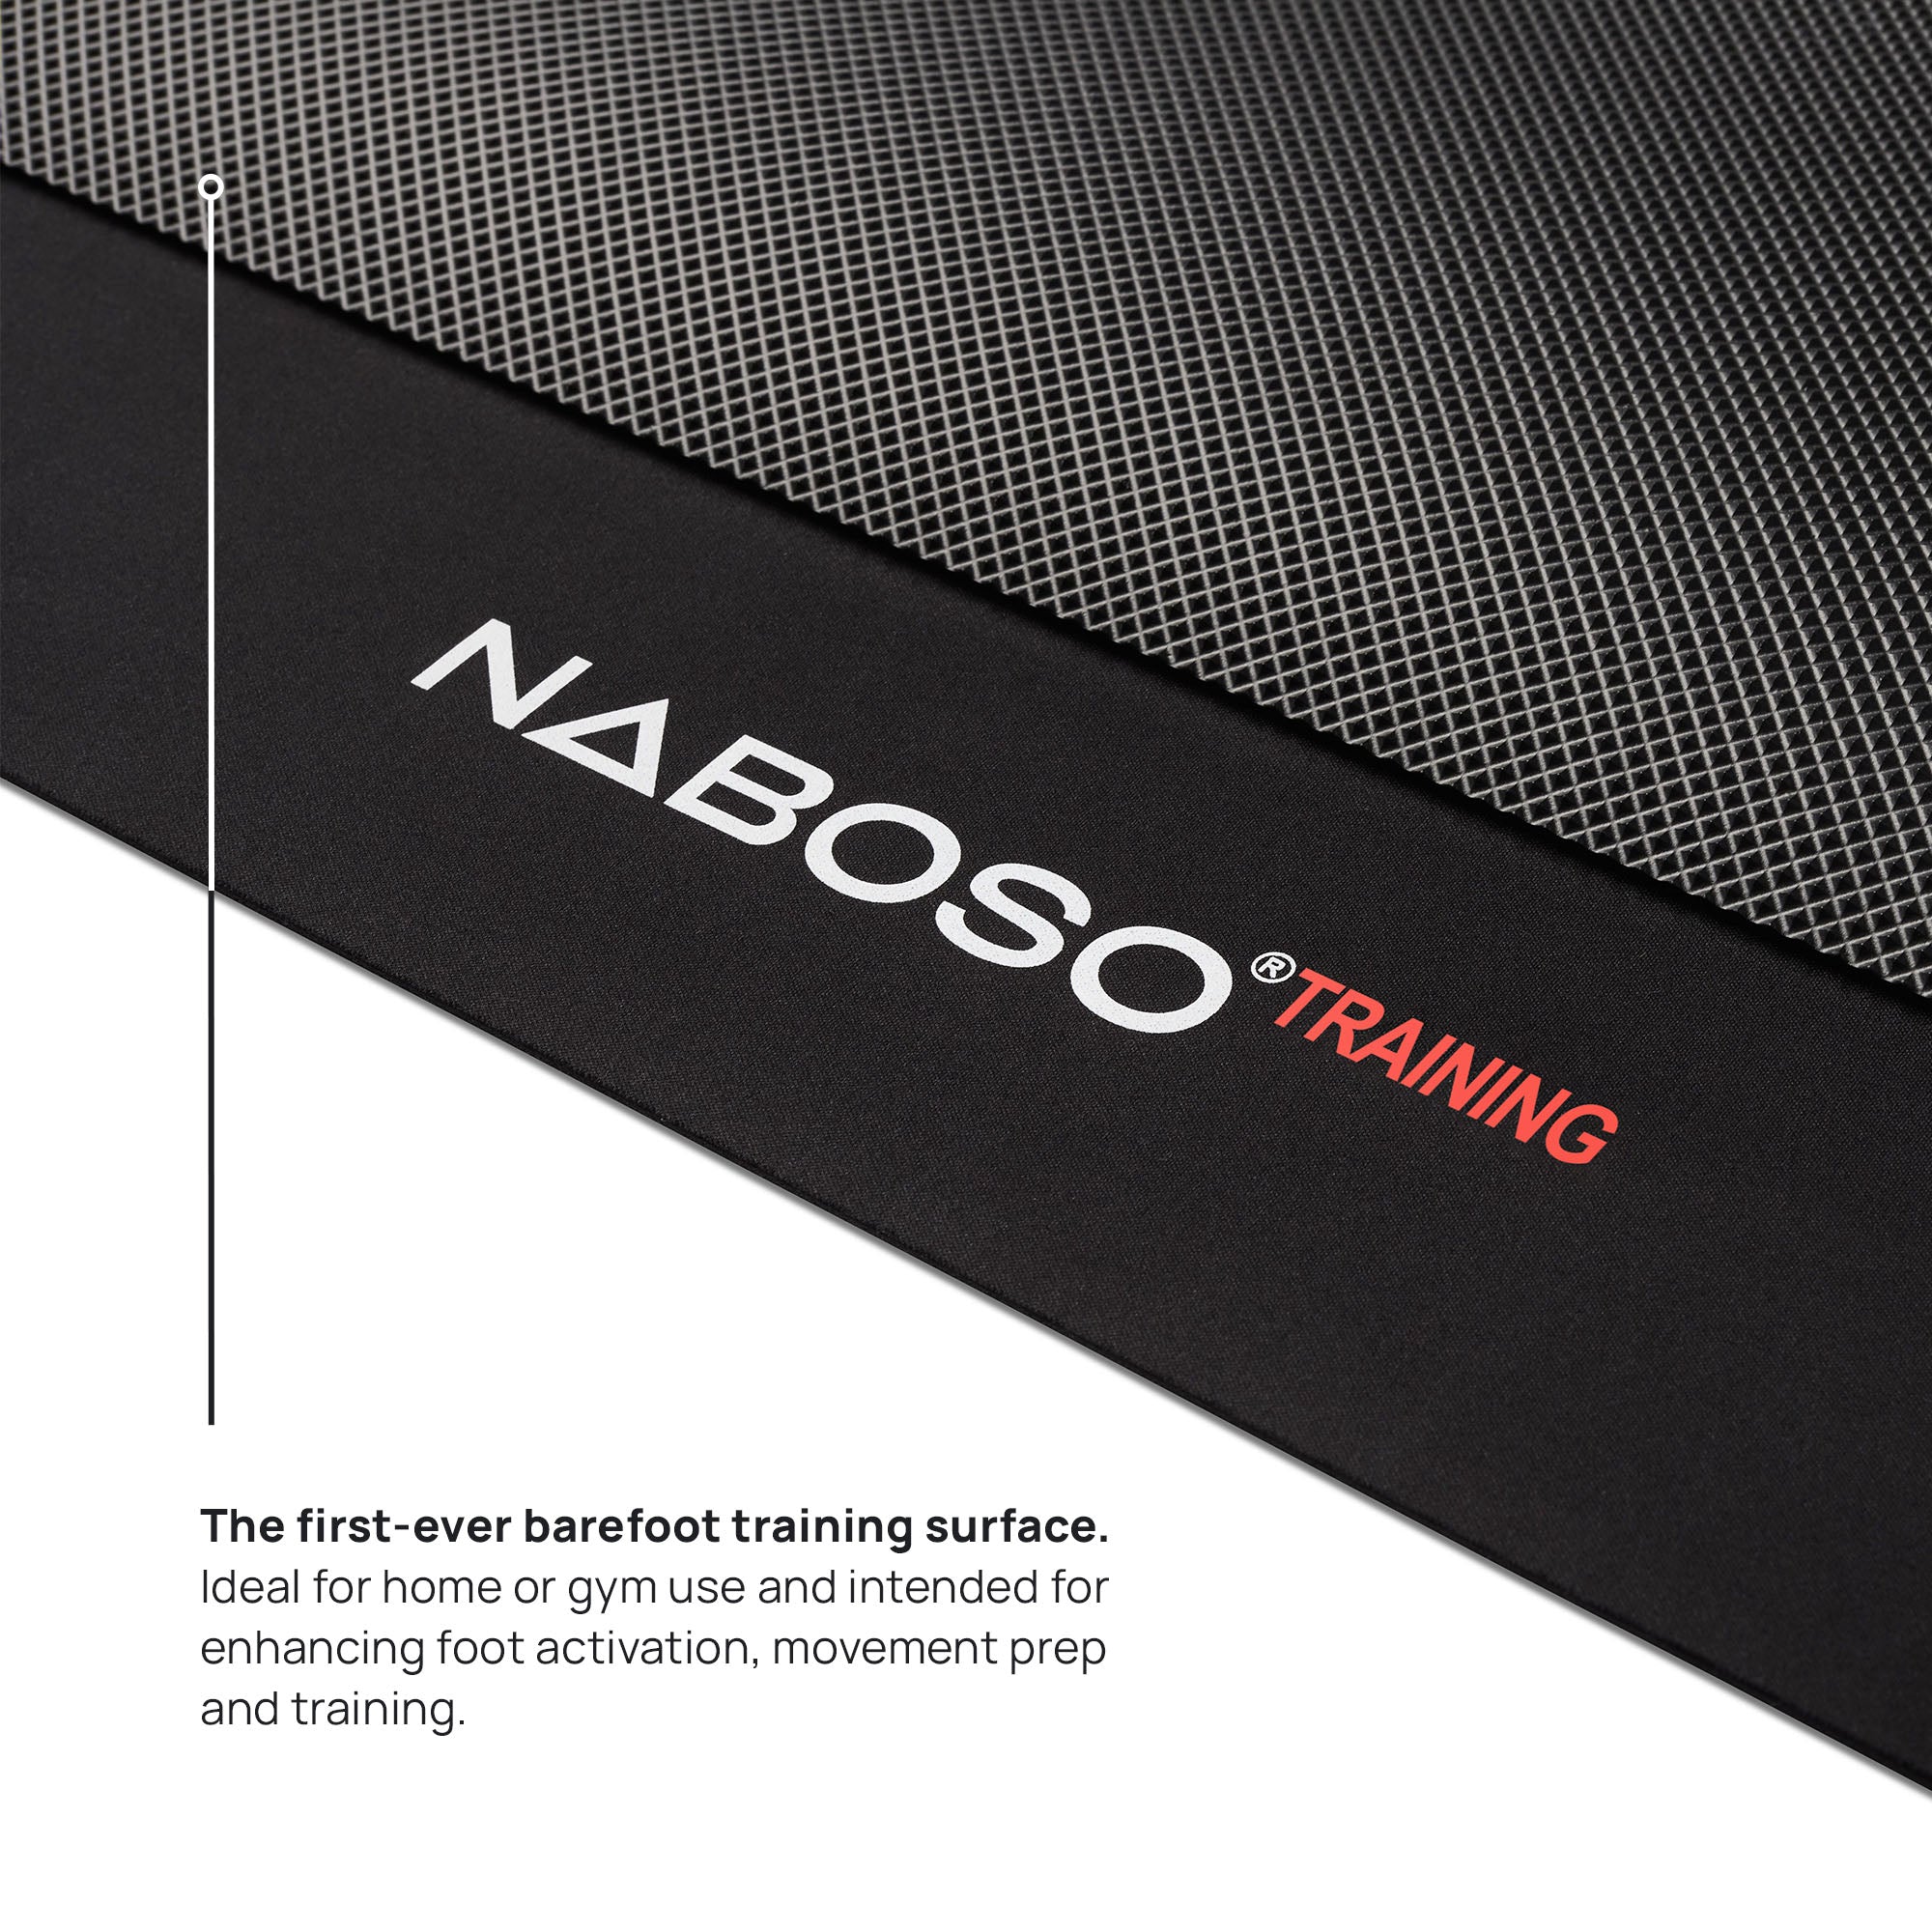 Close up of the Naboso Training Mat, with text that mentions it's the first ever barefoot training surface and is ideal for home or gym use. Intended to enhance feet activation